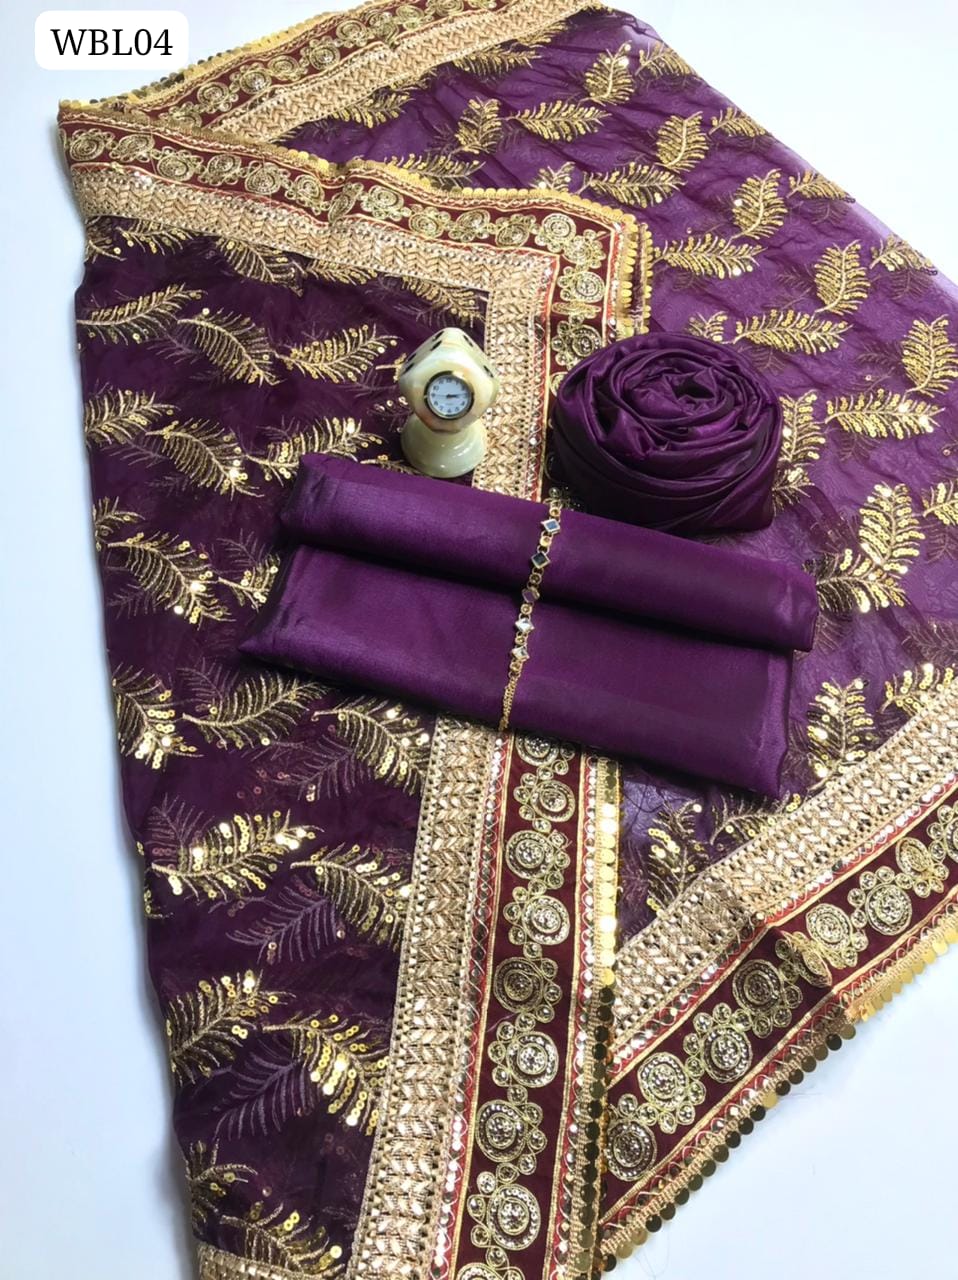 Kataan Fabric Plain Shirt With Organza Full Heavy Sitara Embroidery With Four Border Lace Dupatta And Kataan Plain Trouser 3 Pc Dress With Neckline As a Gift